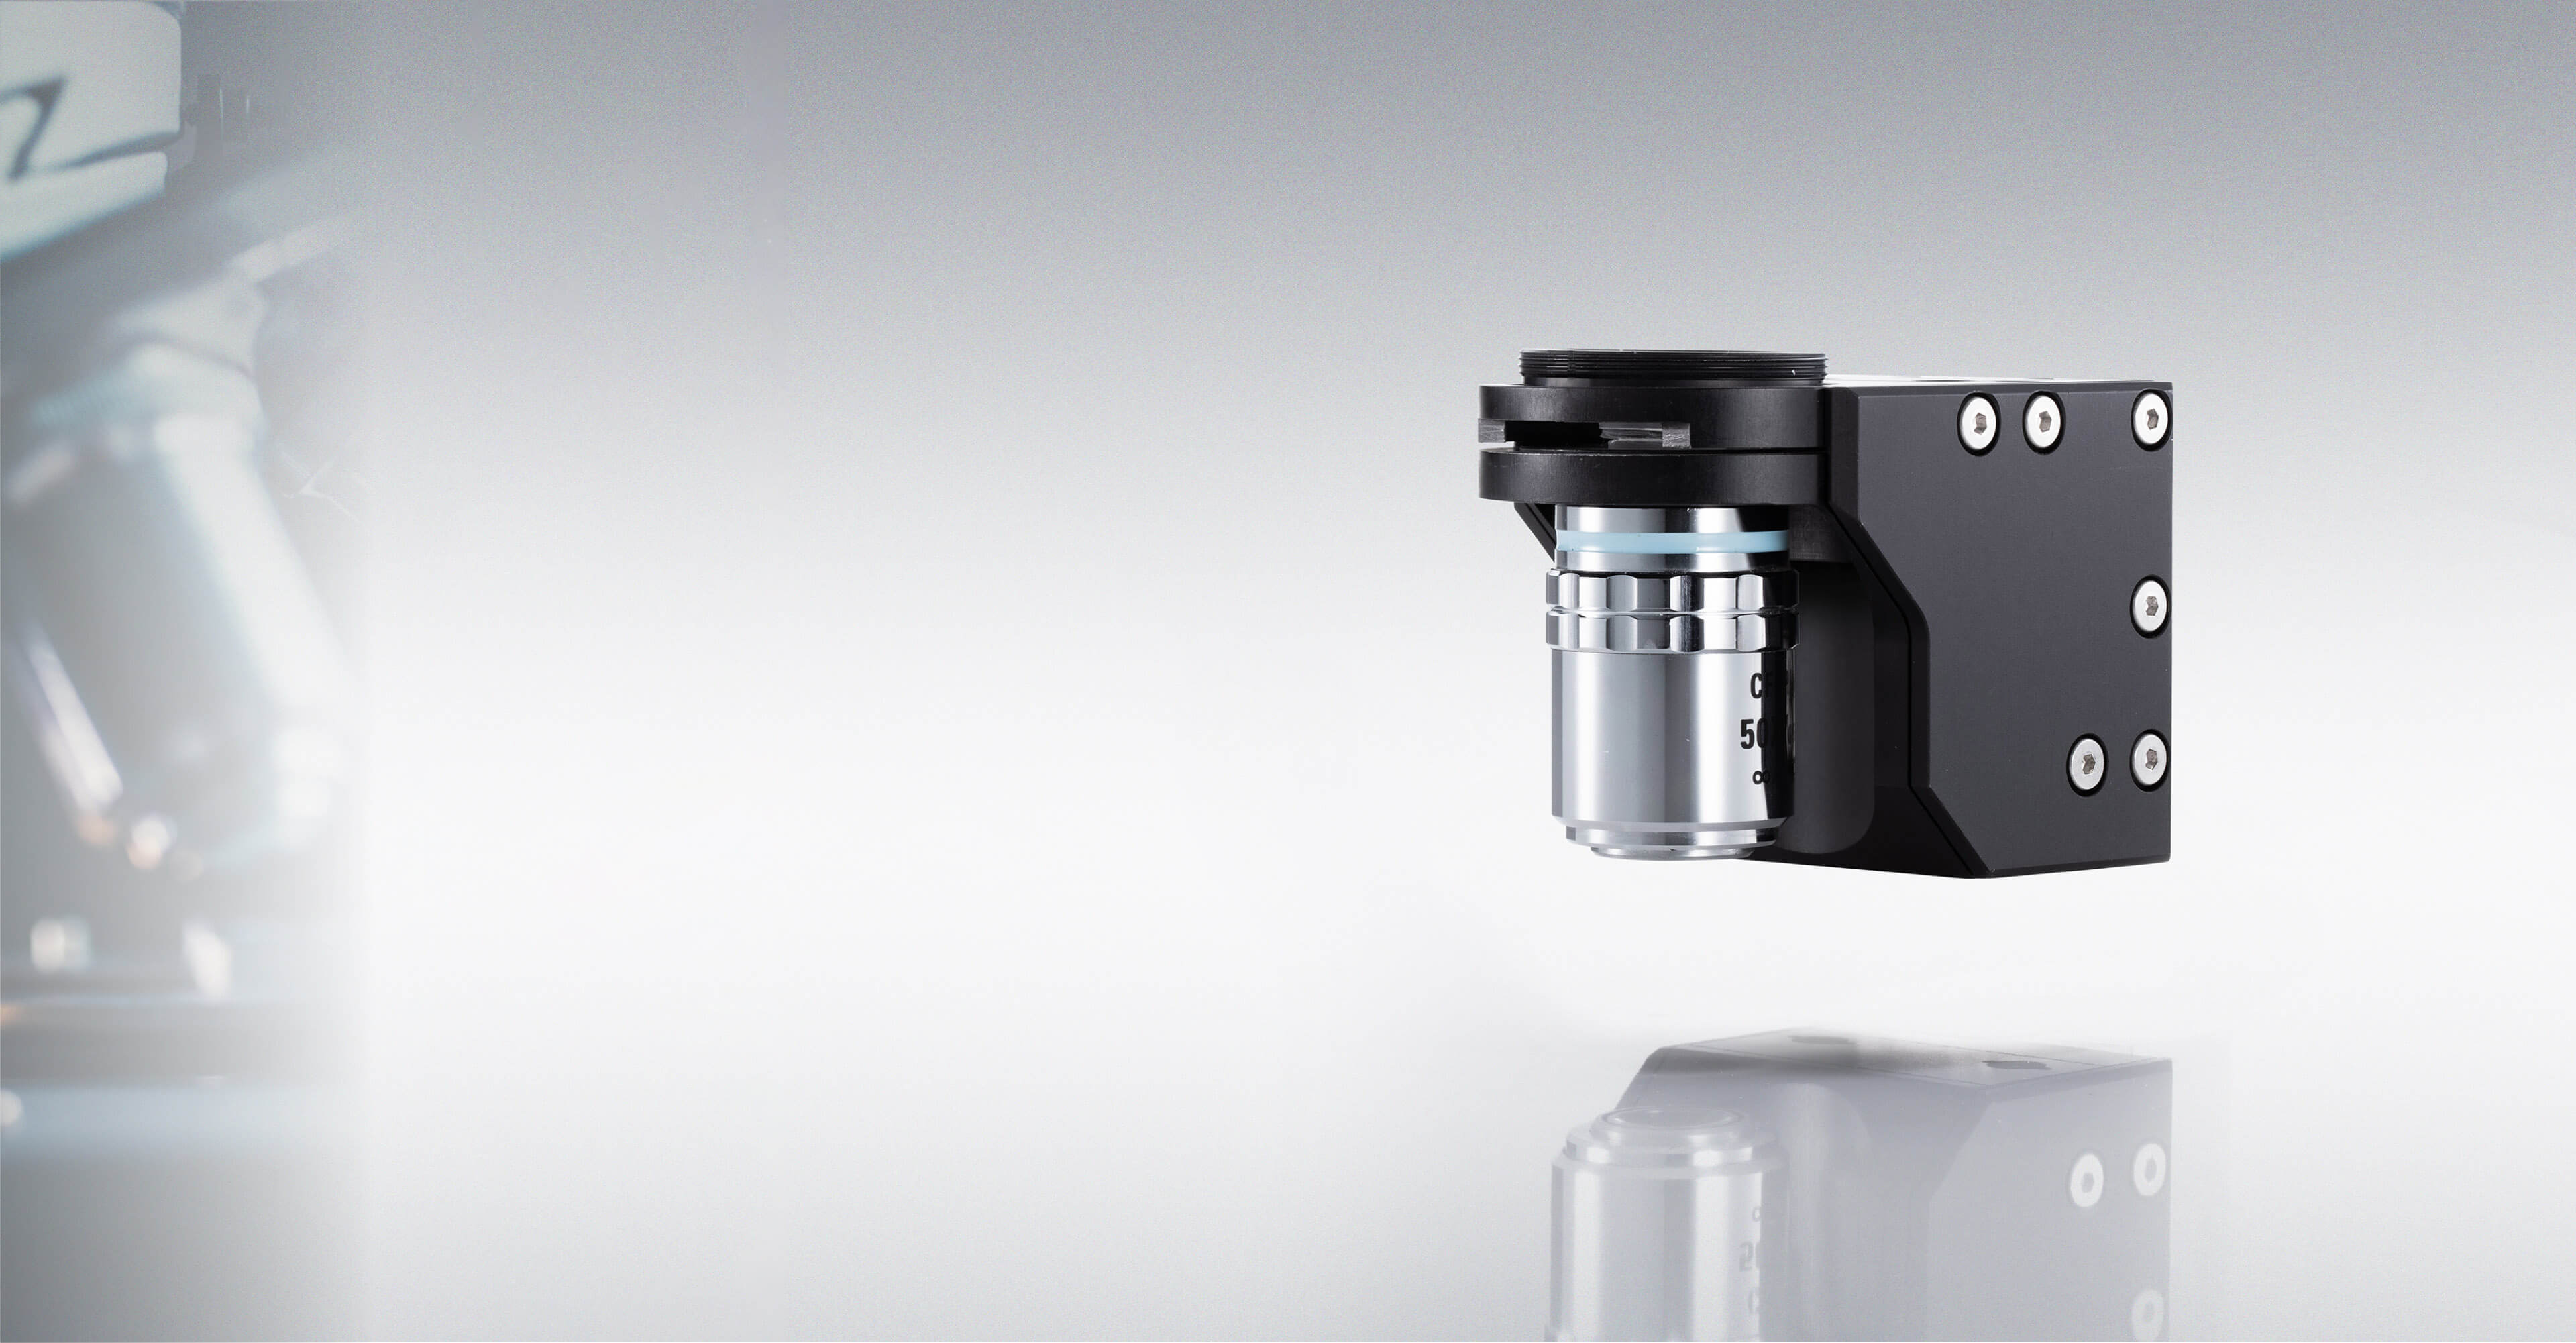 Faster and more precise lens focusing by incorporating into microscopes, inspection / measuring devices, and observation equipment